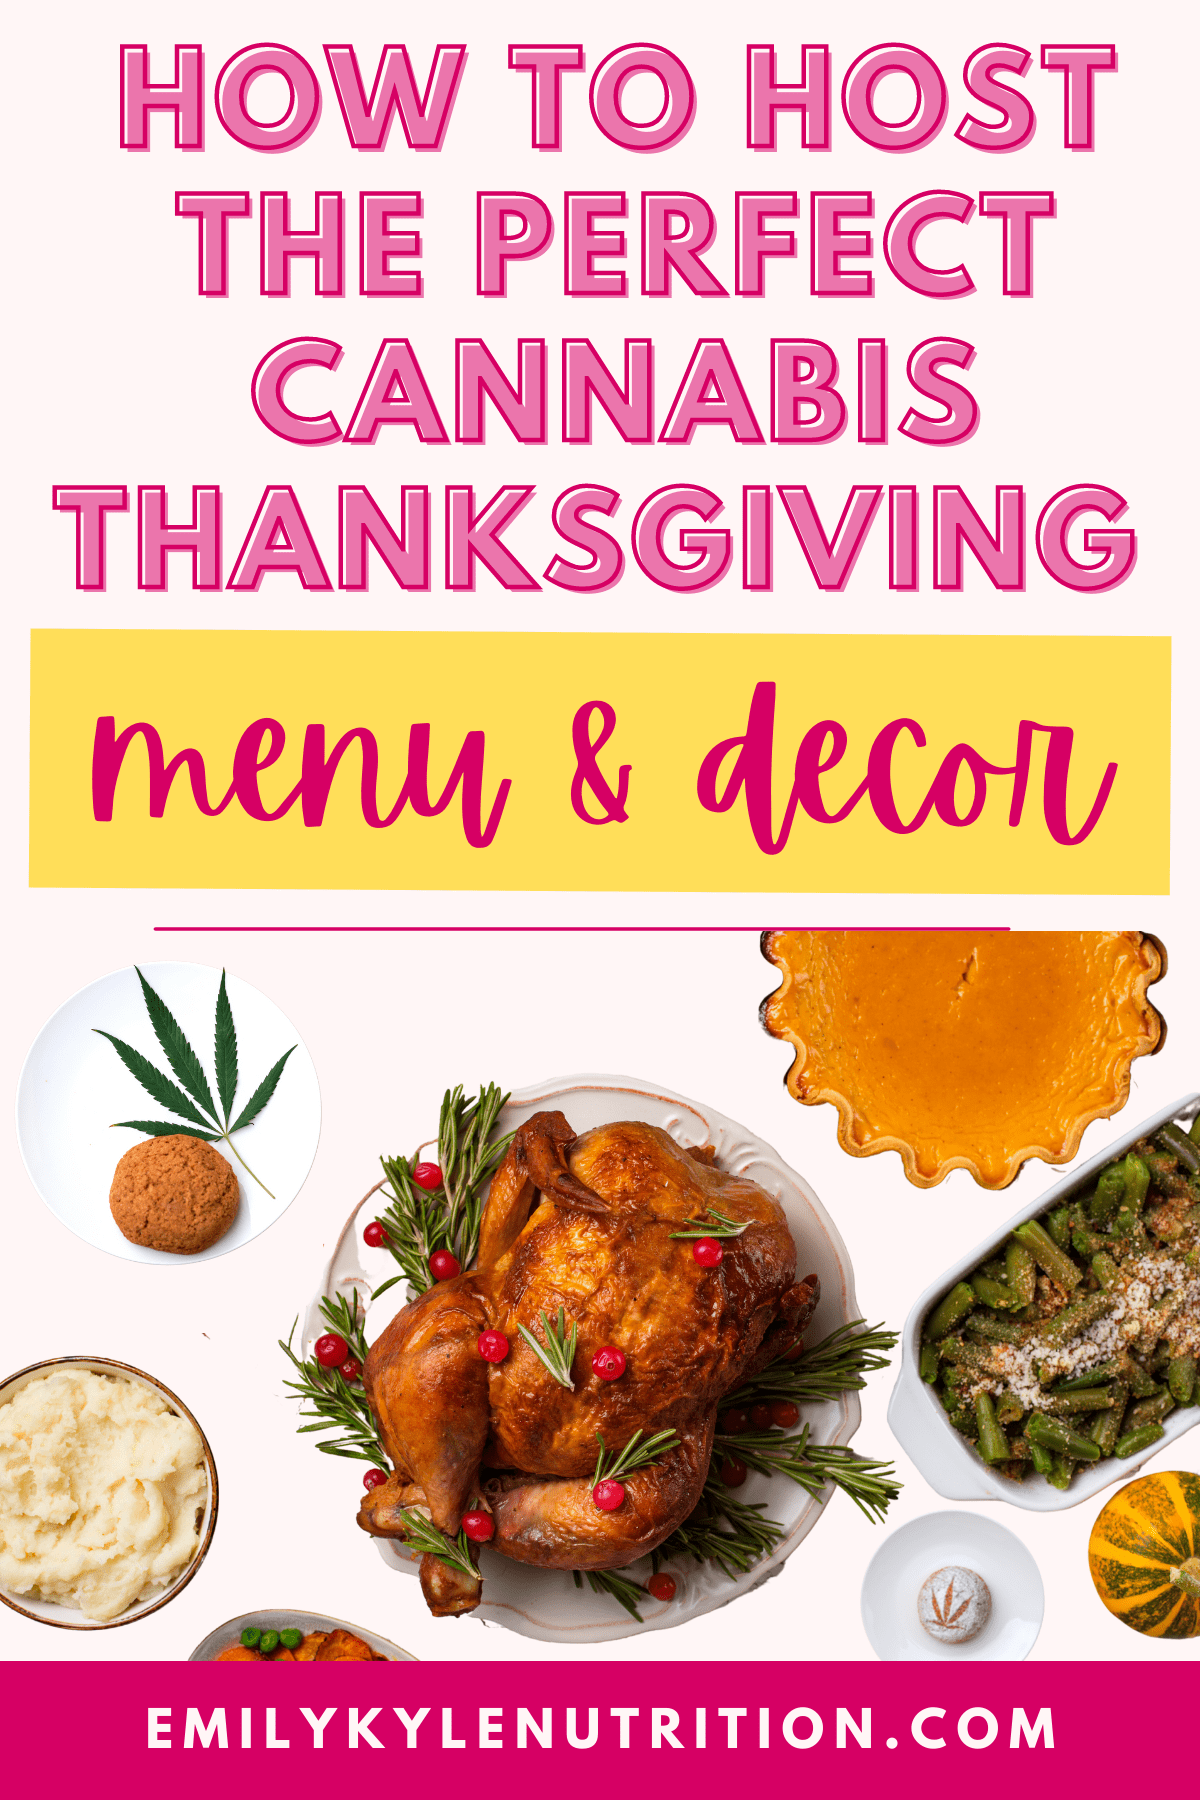 Graphic titled how to host the perfect cannabis thanksgiving, menu & decor, with a thanksgiving dinner spread including turkey, mashed potatoes, and a cannabis leaf